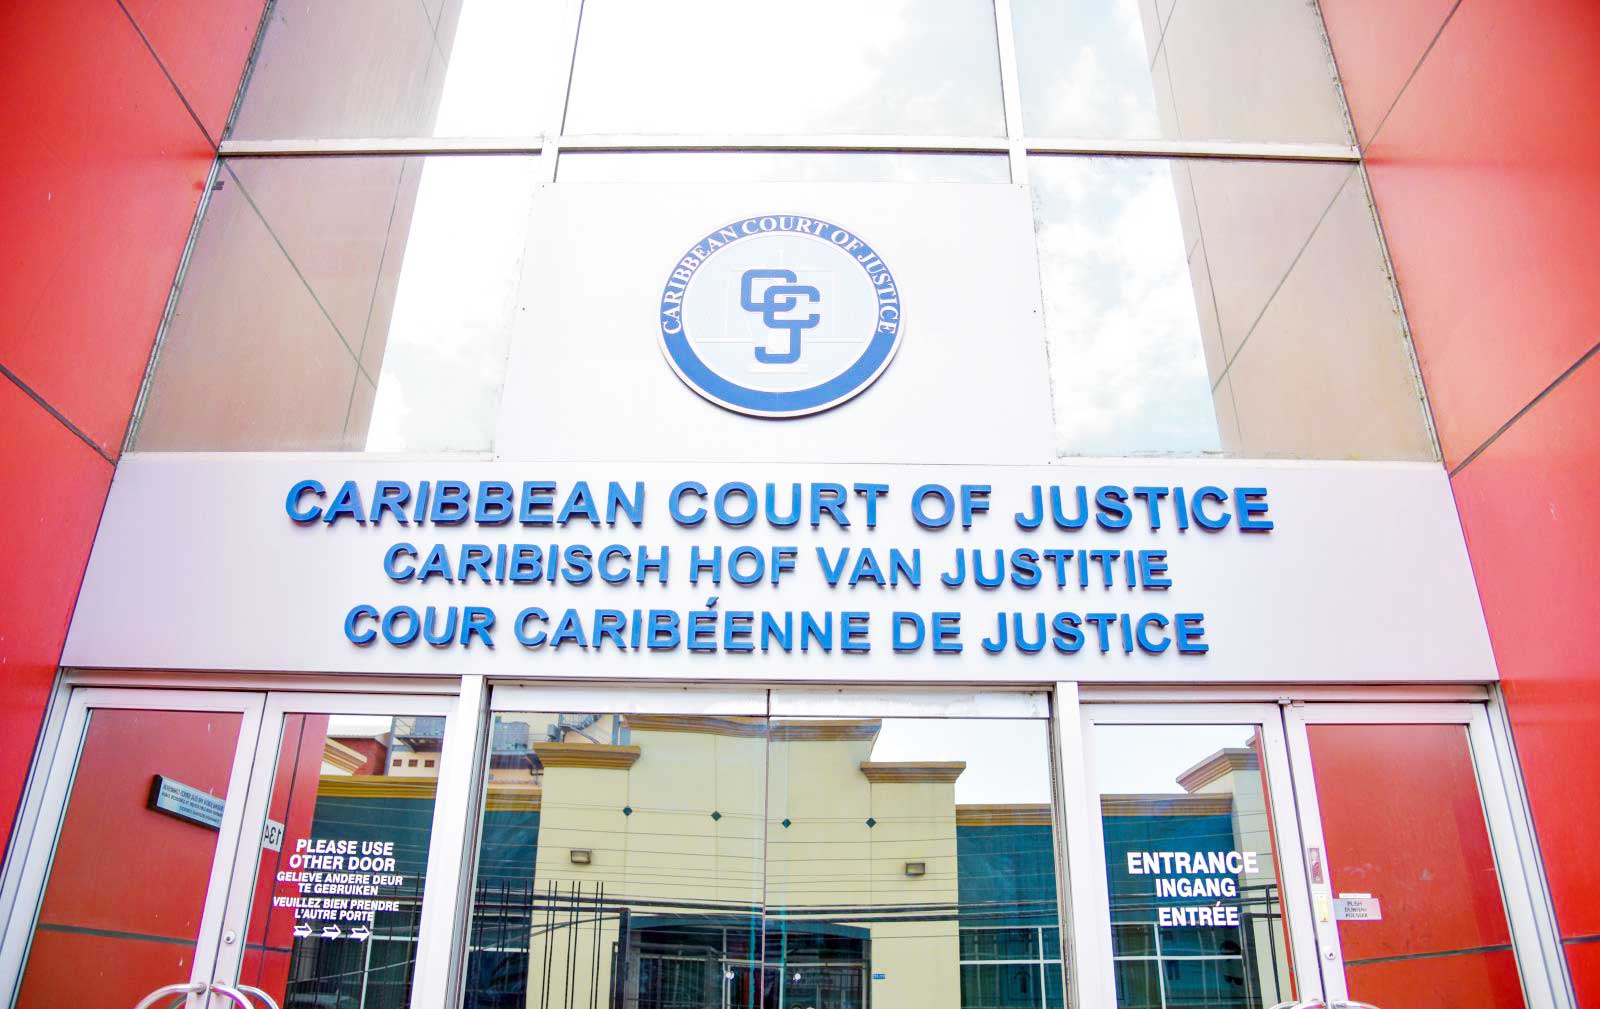 CCJ accepted into the International Consortium for Court Excellence